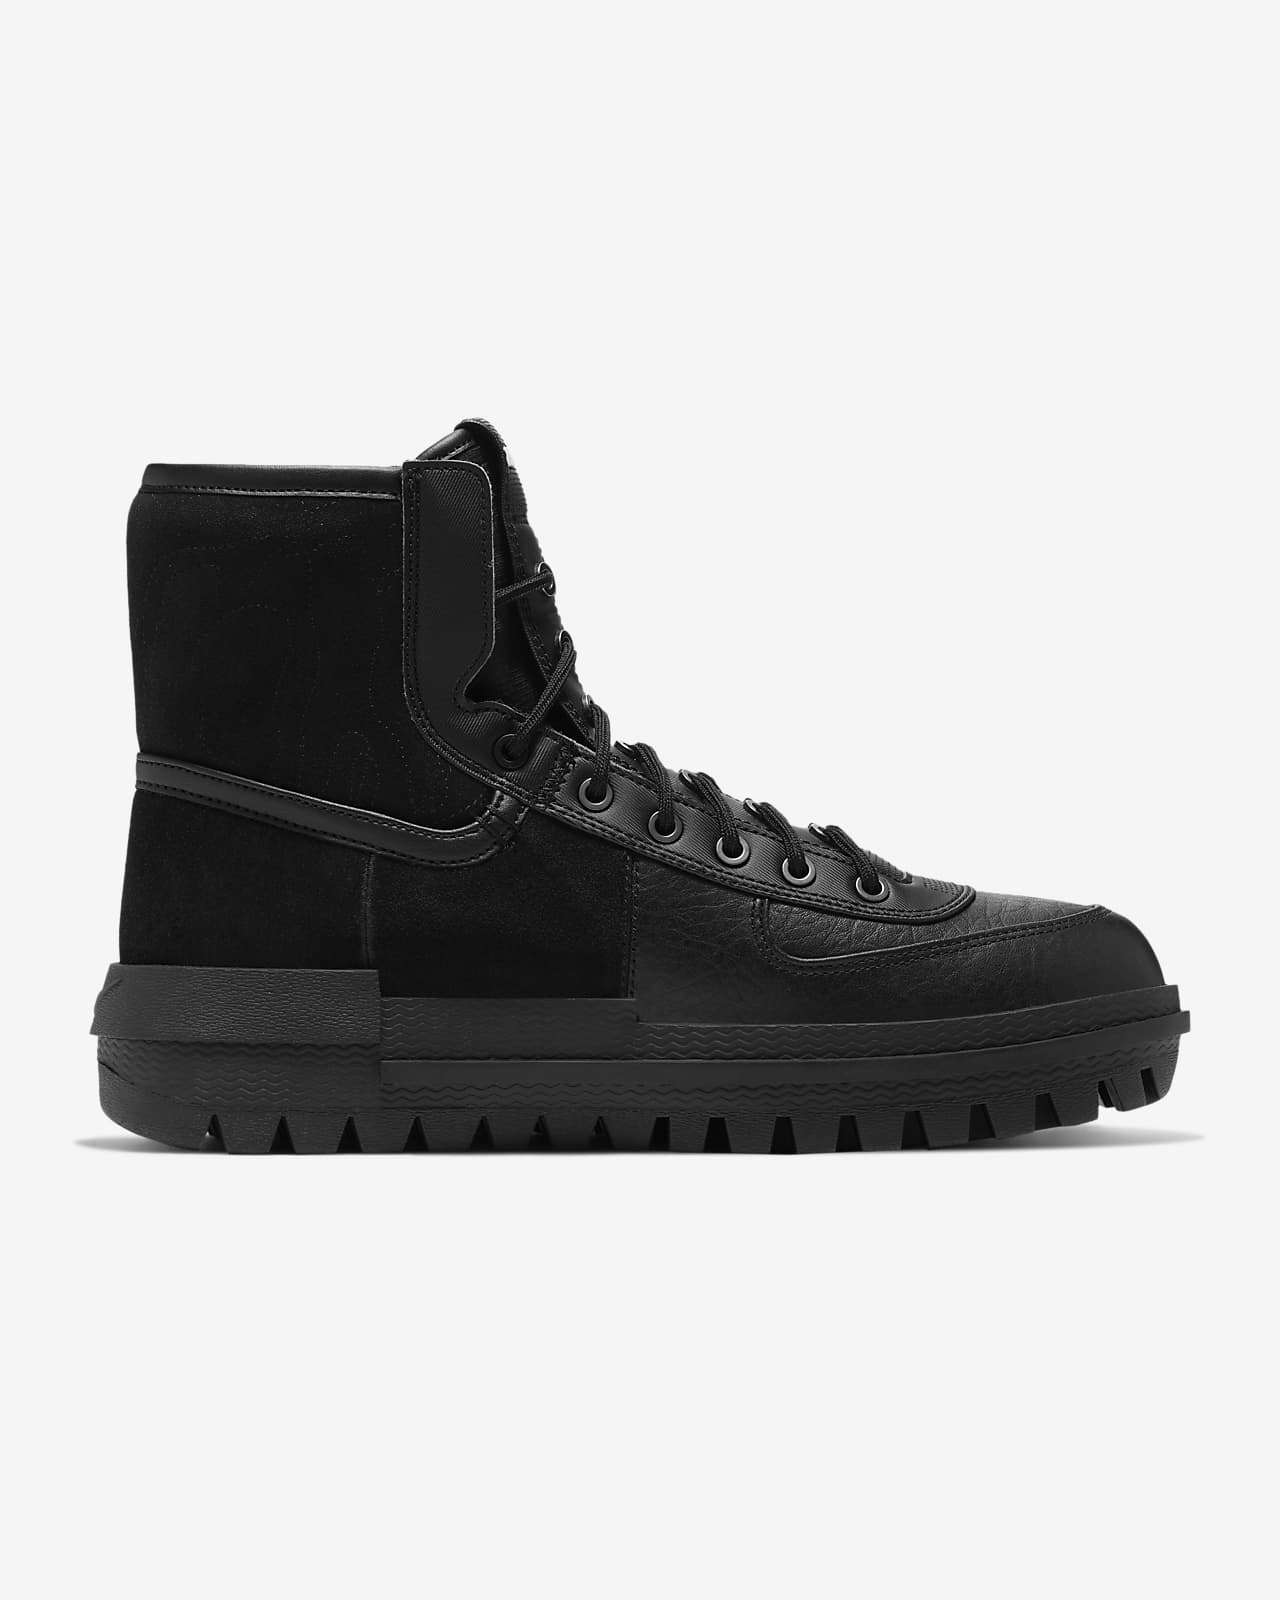 theioth nike boots